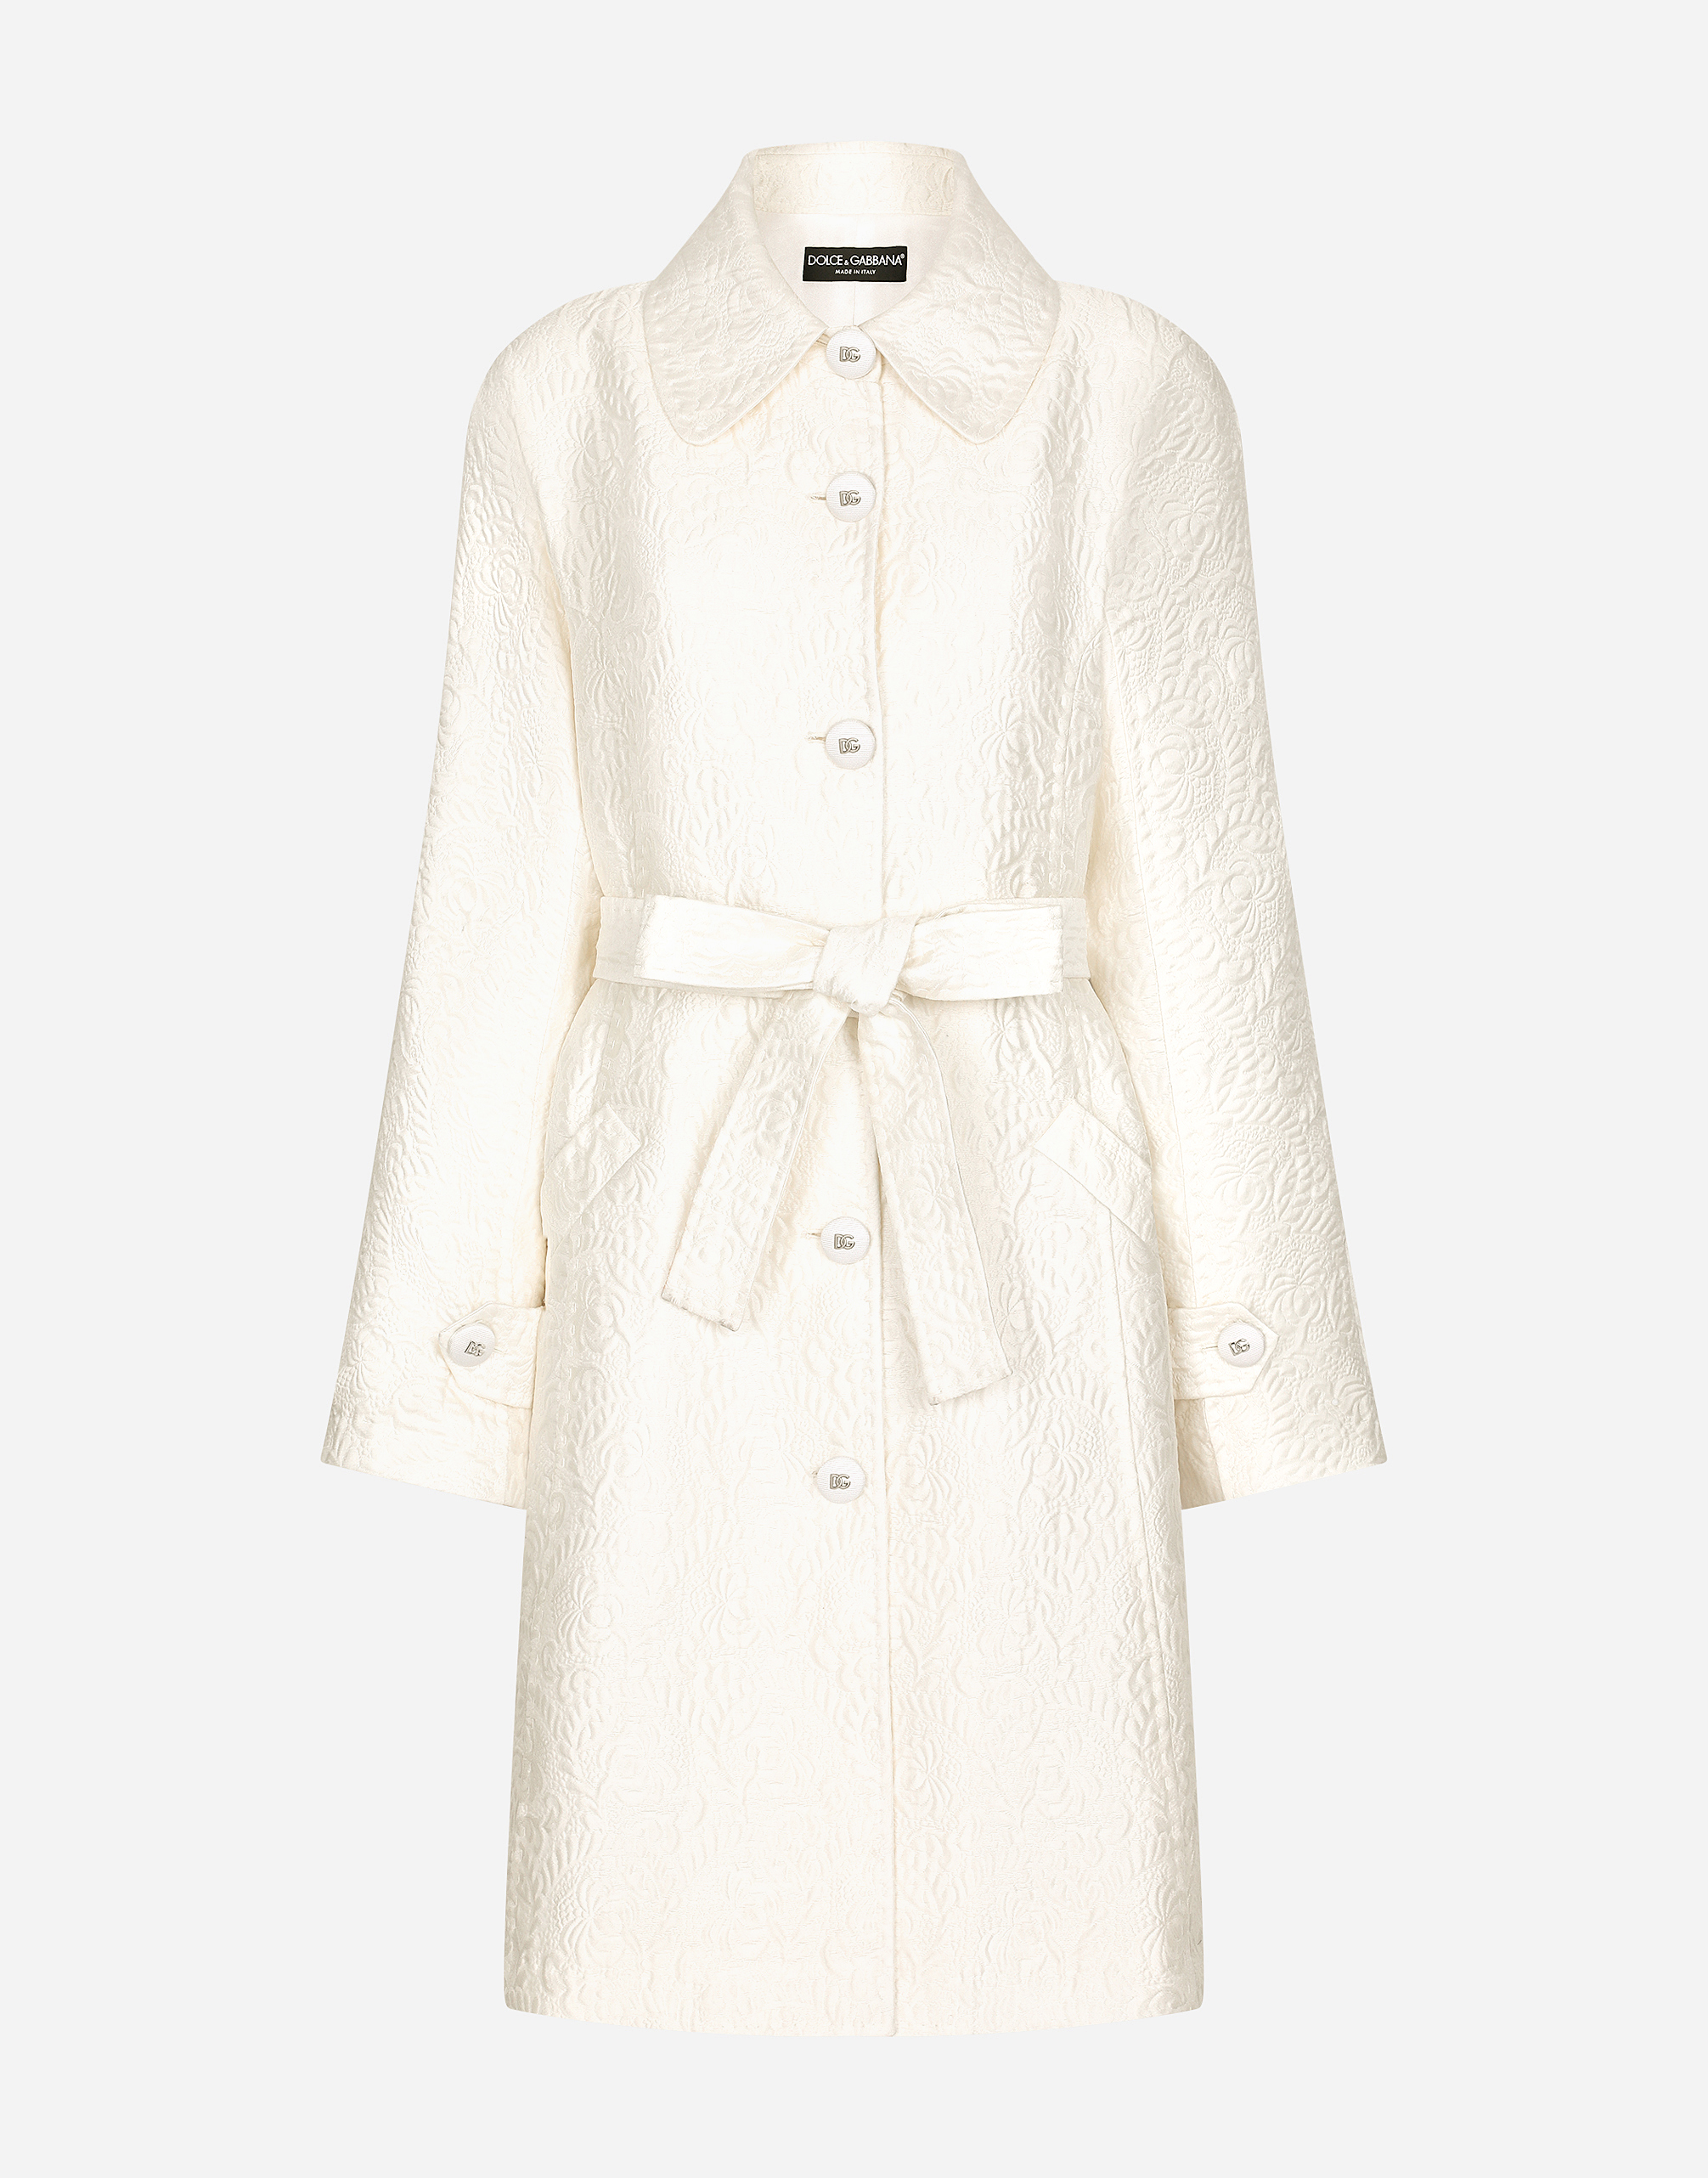 Dolce & Gabbana Belted Floral Jacquard Coat In White